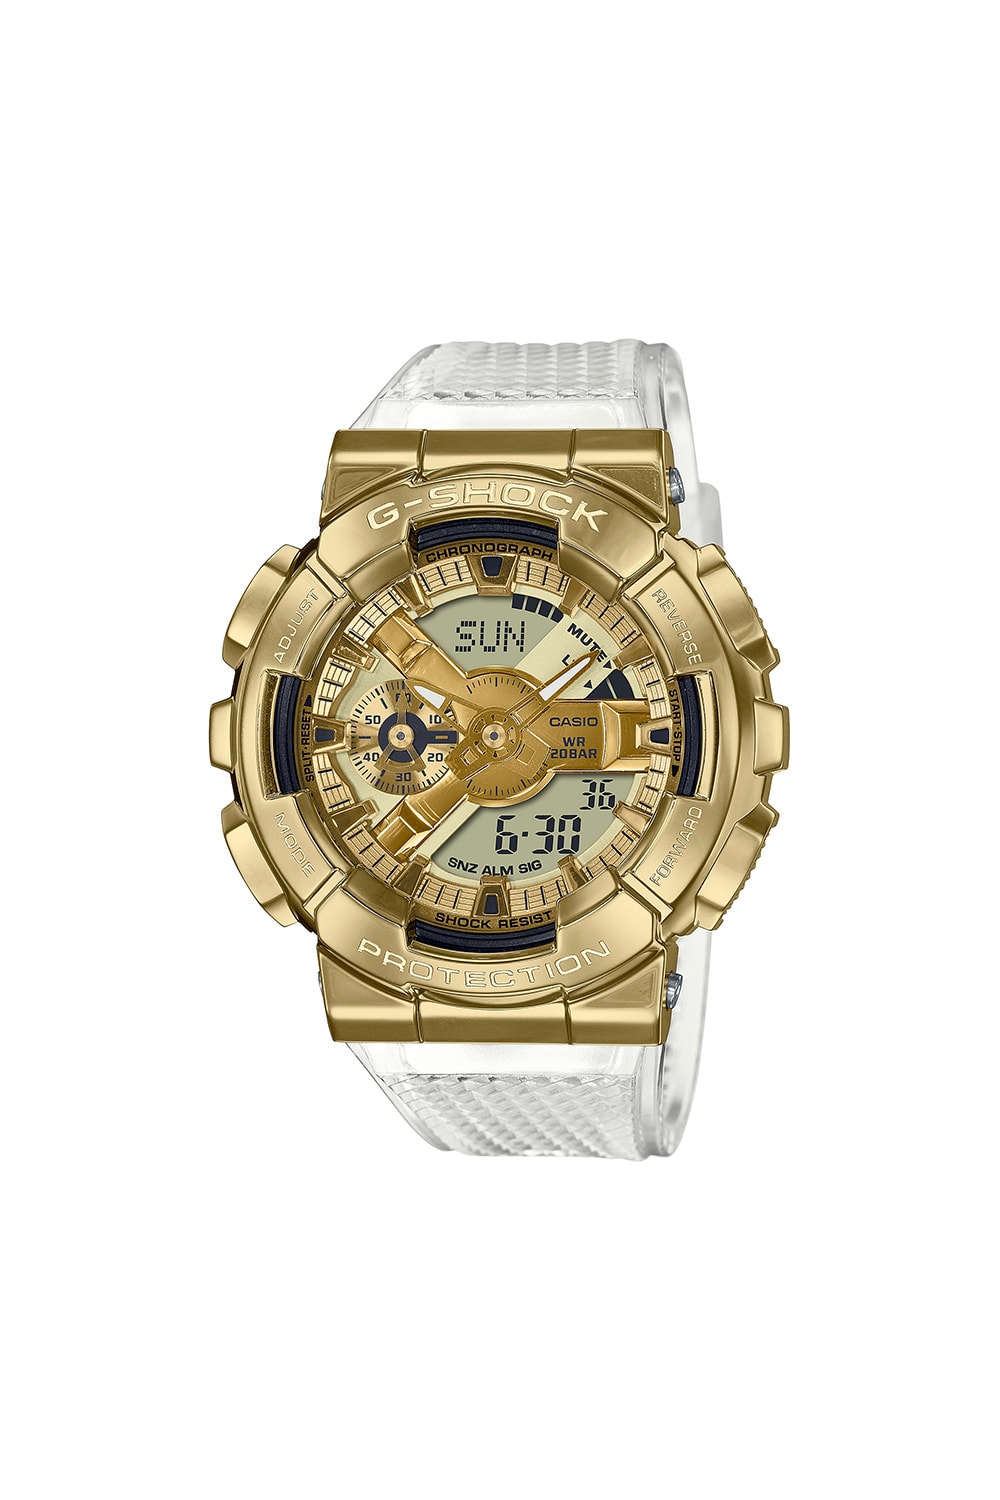 casio g shock metal skeleton gold series GM 110 GM 5600 GM 6900 9 watches watch accessories collectibles release